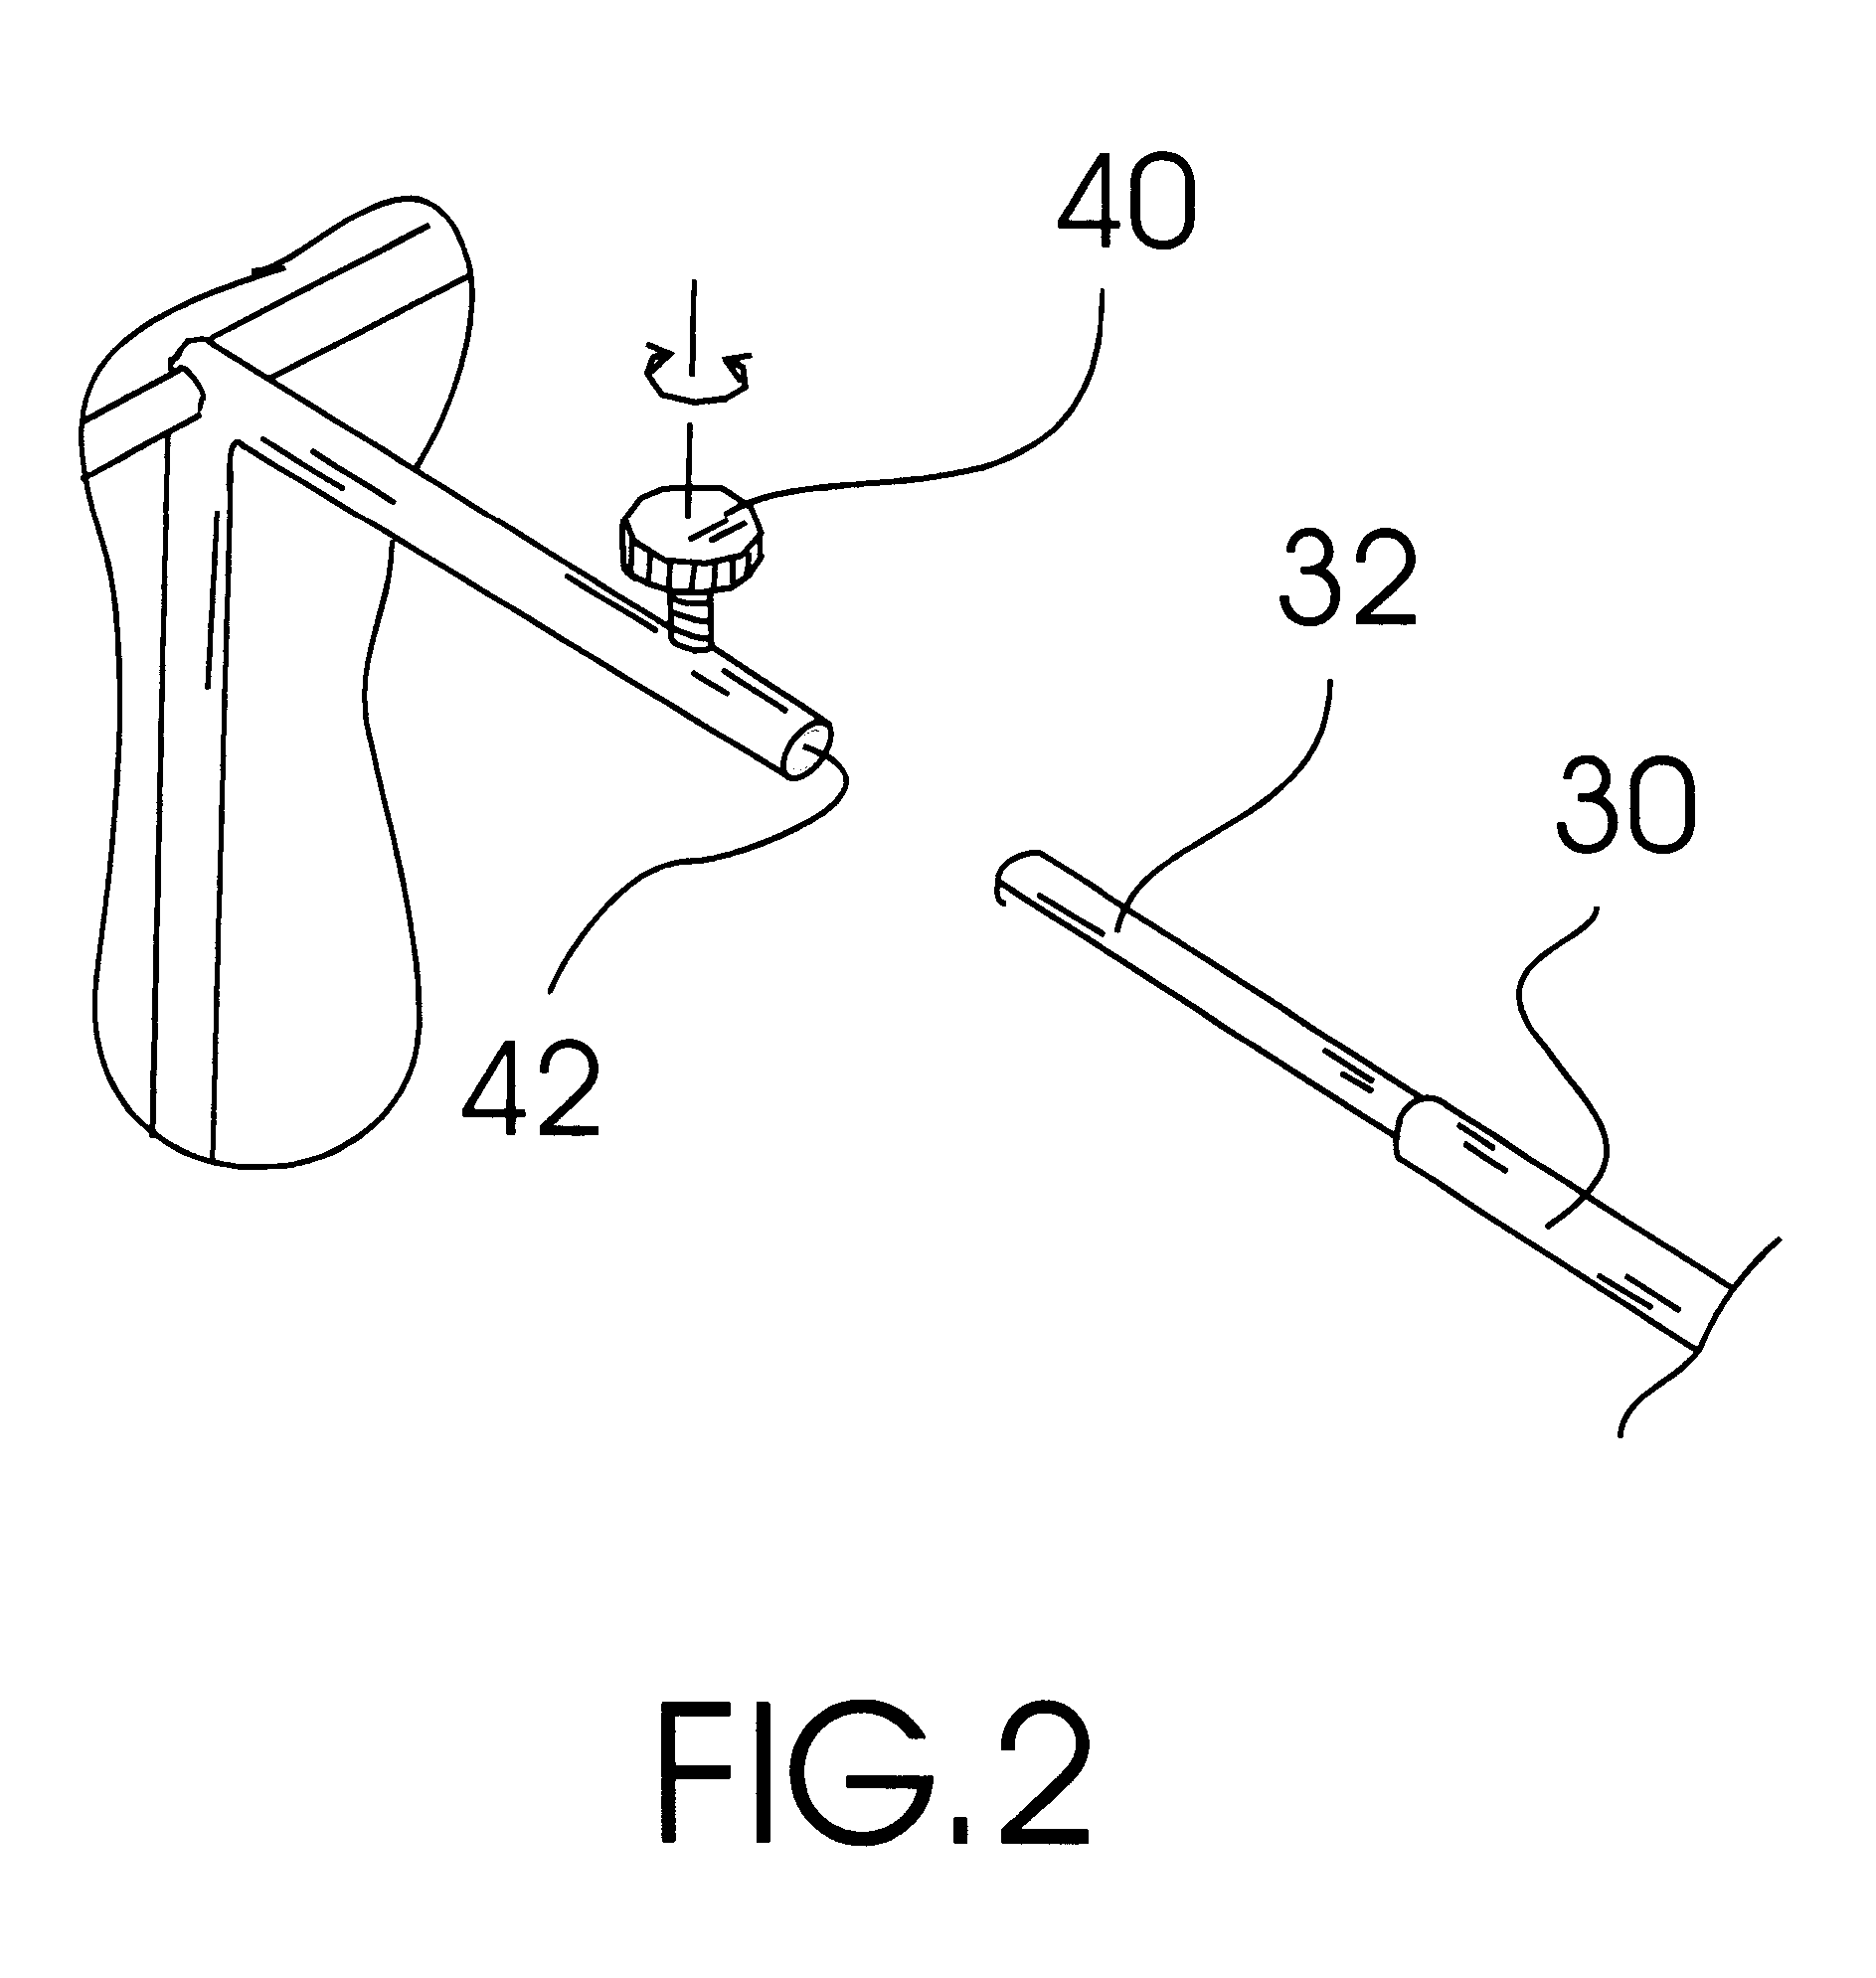 Adjustable downspout screening device